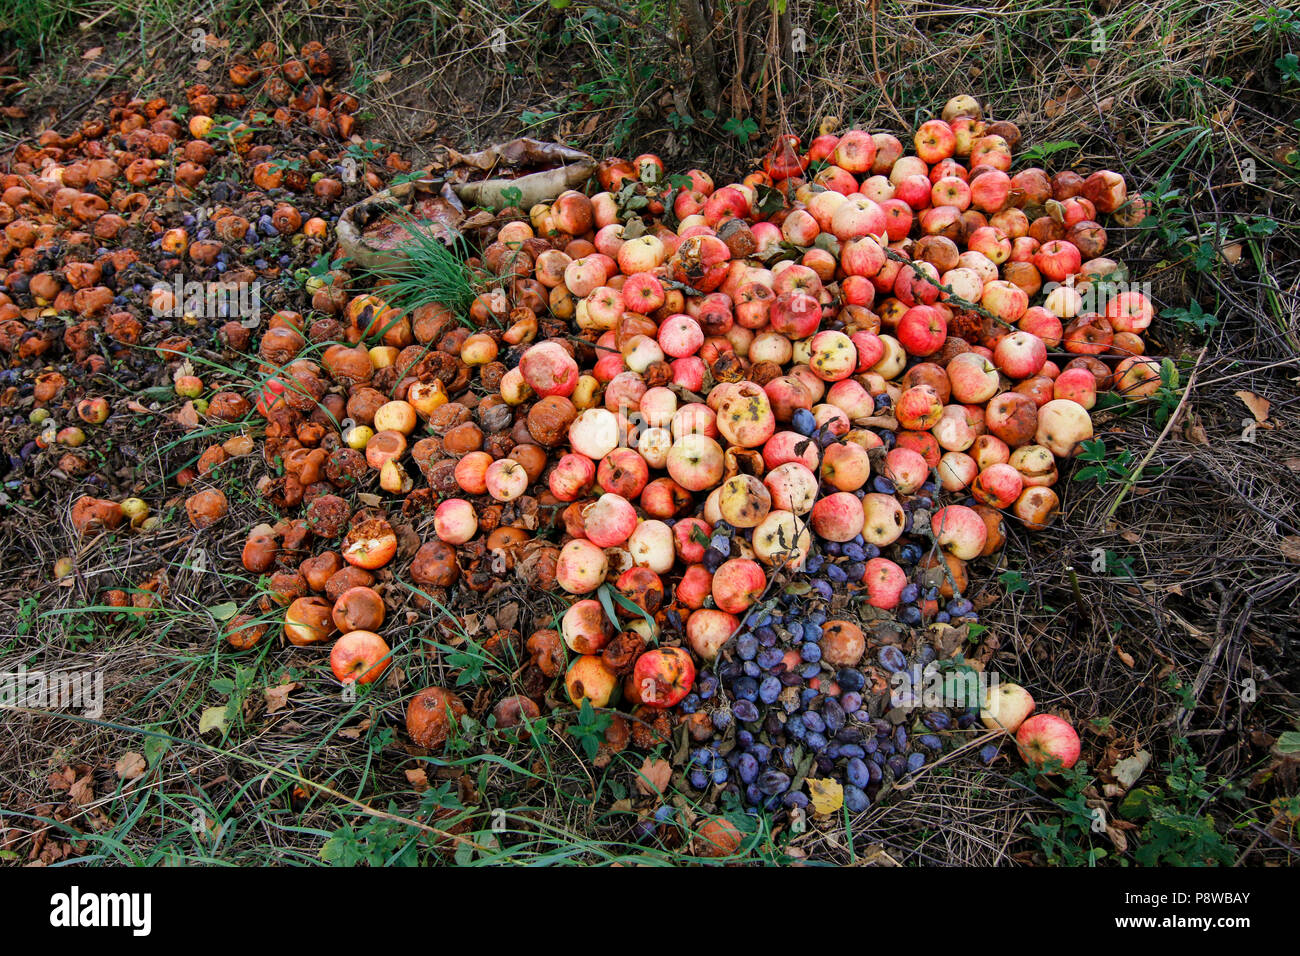 Waste from autumn harvest - putrid fruits Stock Photo